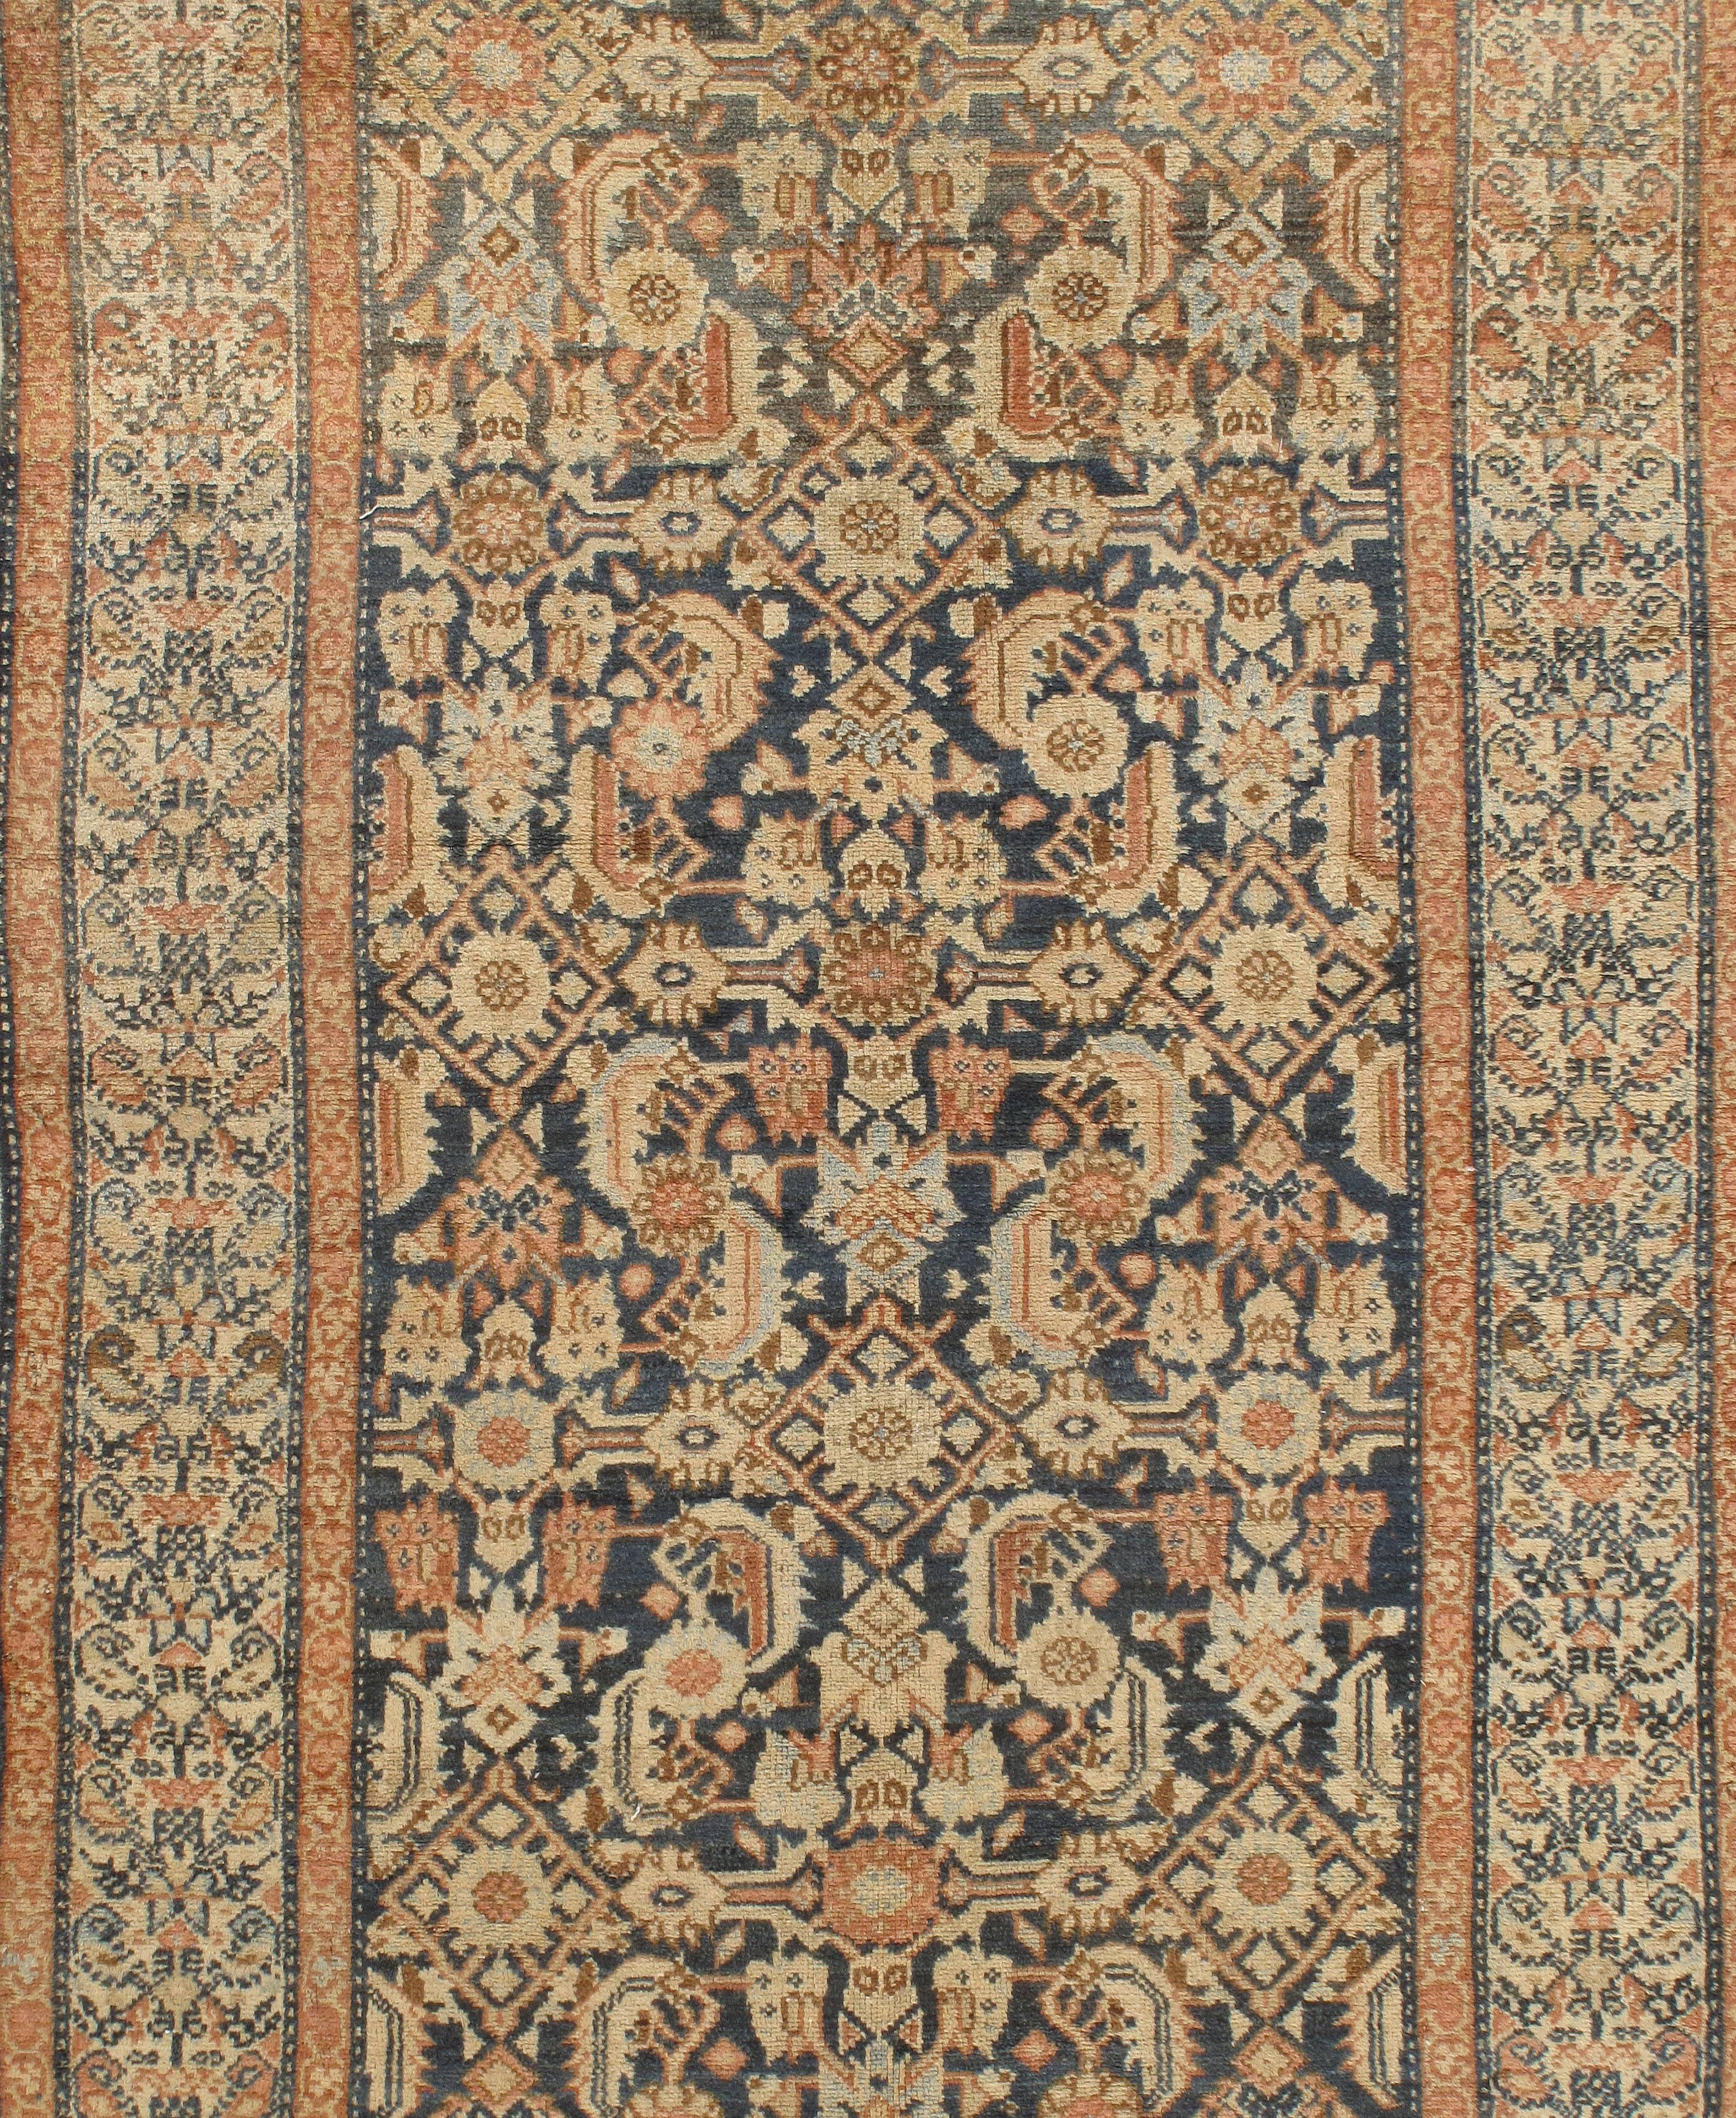 Malayer rugs comes from west Persia near Hamadan woven in a range of medallion and all-over designs, they have a wonderful style that makes them excellent decorative pieces so suitable for today’s designs and themes.